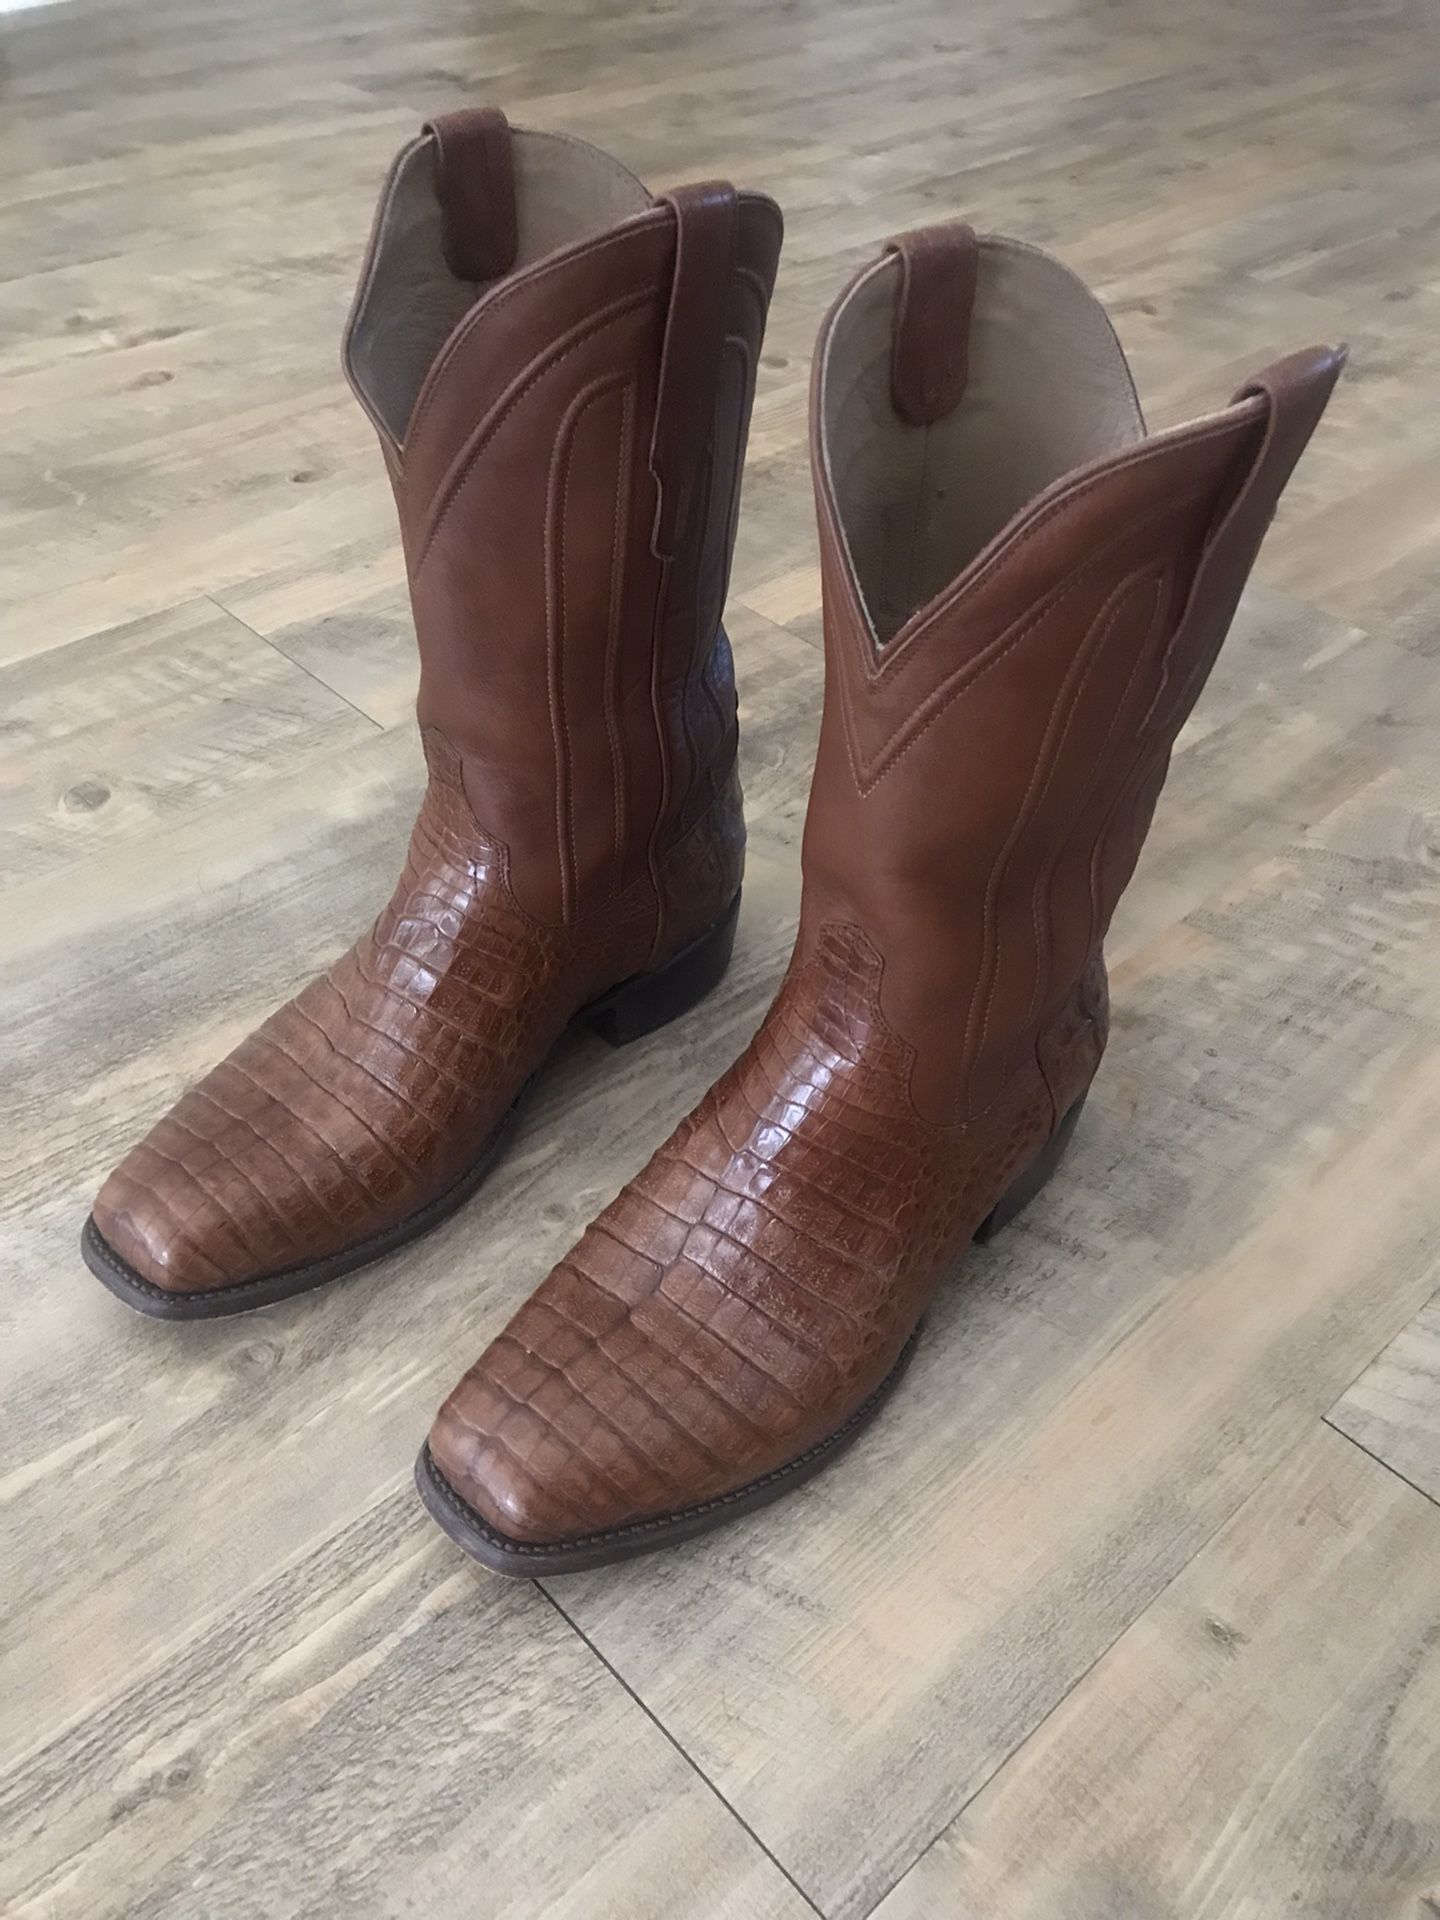 Tecovas Caiman Boots - Size 11D for Sale in Fulshear, TX - OfferUp